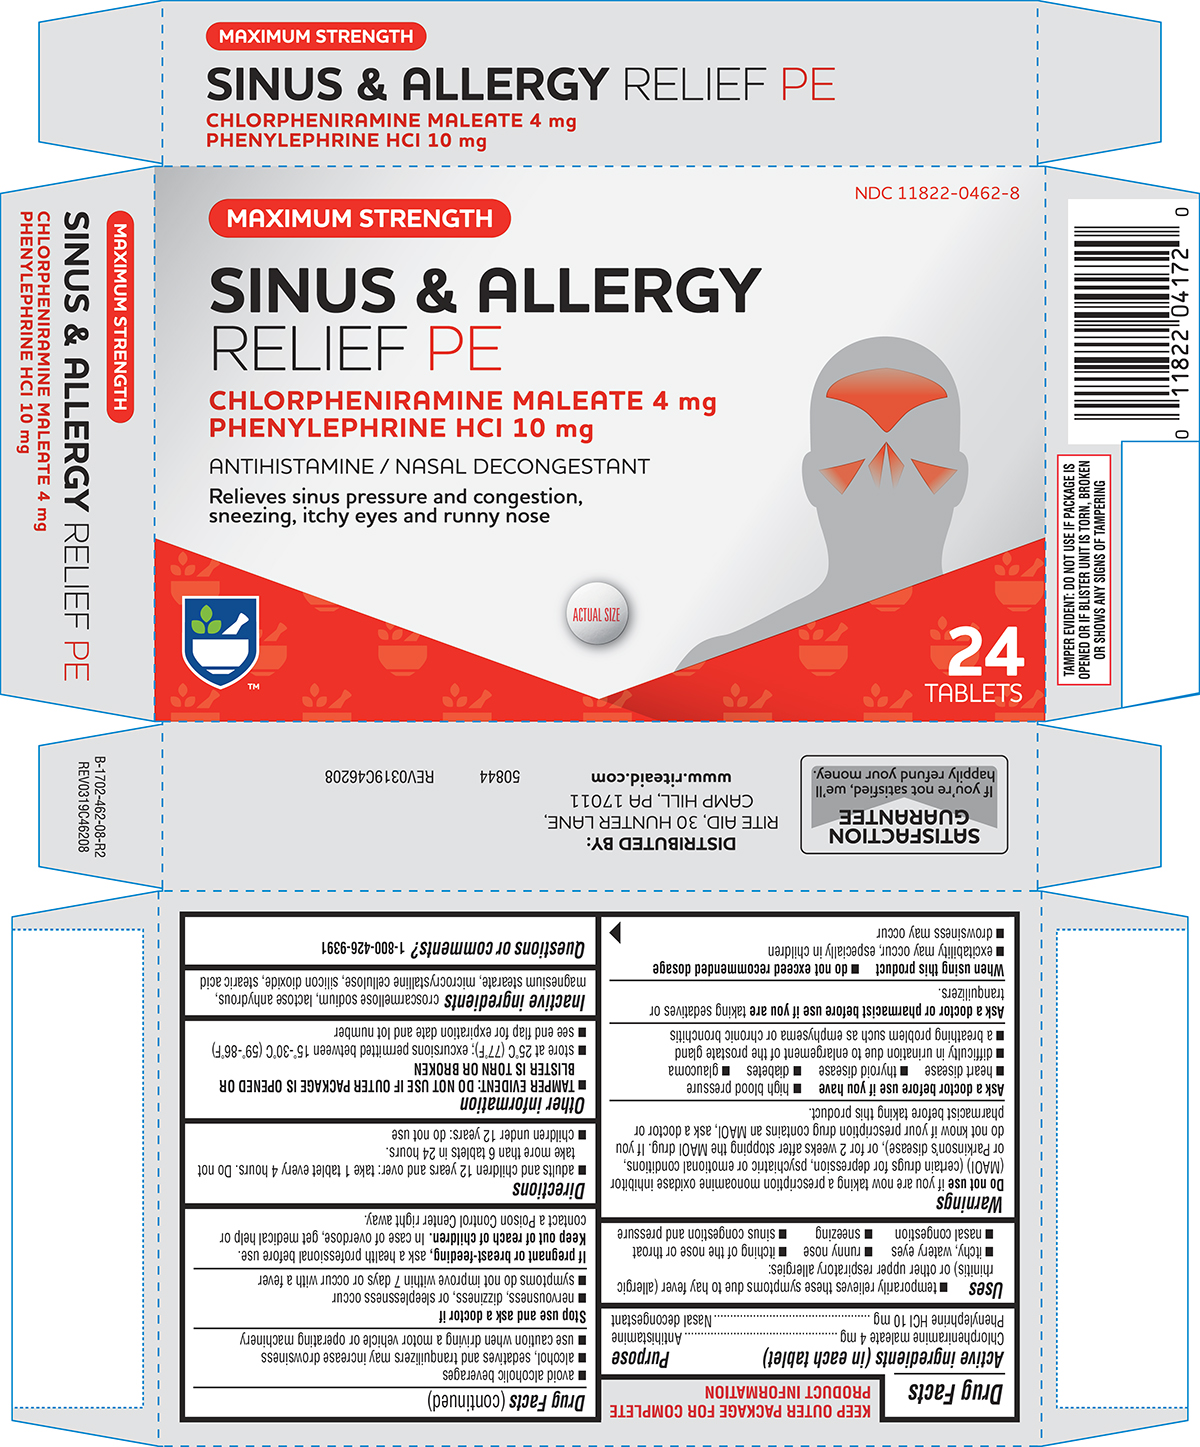 Sinus And Allergy Relief Pe | Chlorpheniramine Maleate And Phenylephrine Hcl Tablet while Breastfeeding